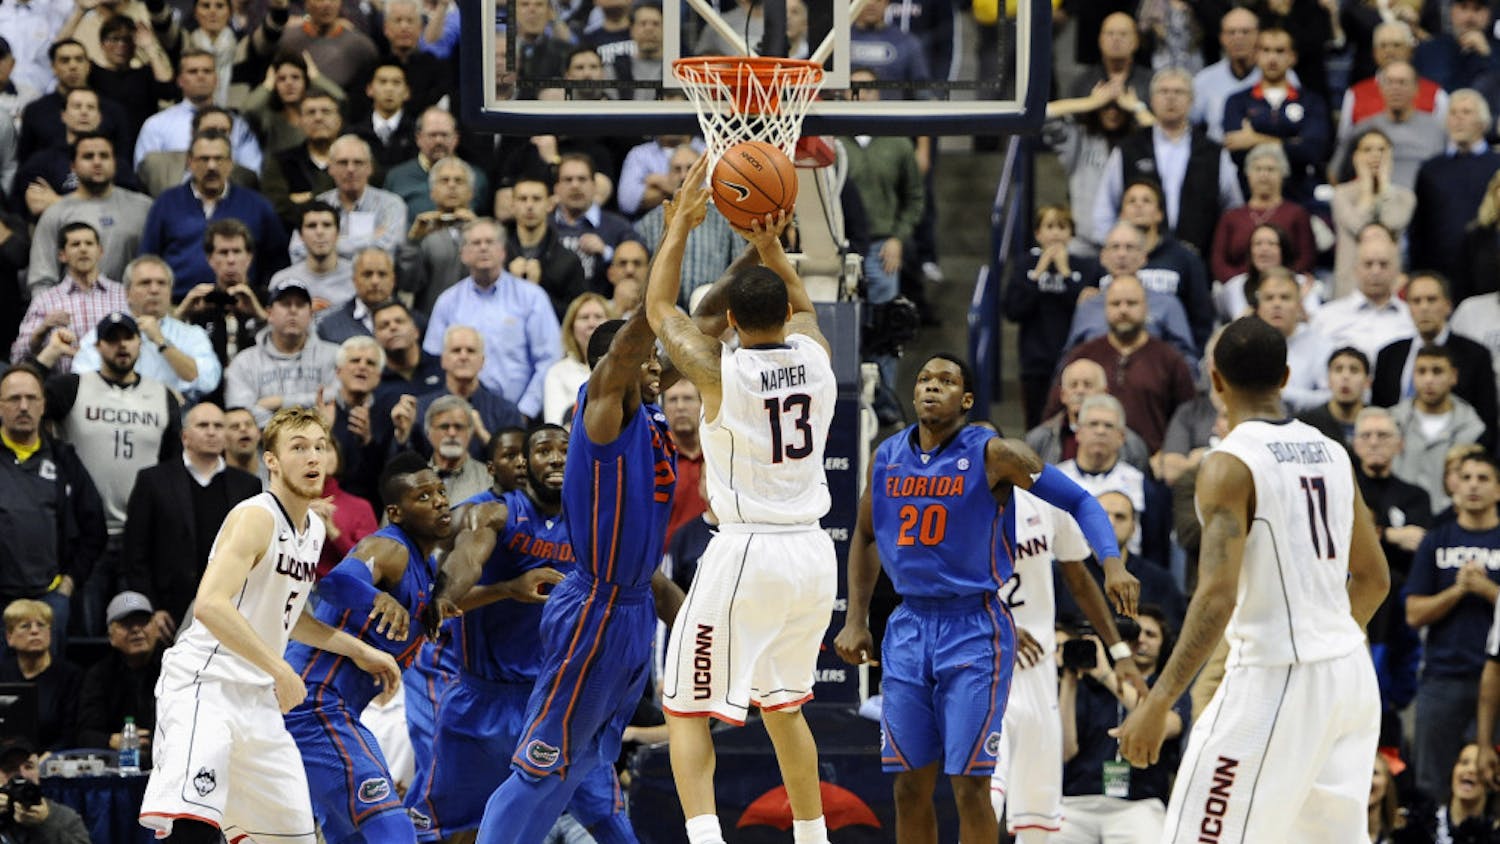 Connecticut's Shabazz Napier (13) goes up for the game winning basket at the buzzer during its 65-64 win against Florida on Monday in Storrs, Conn.